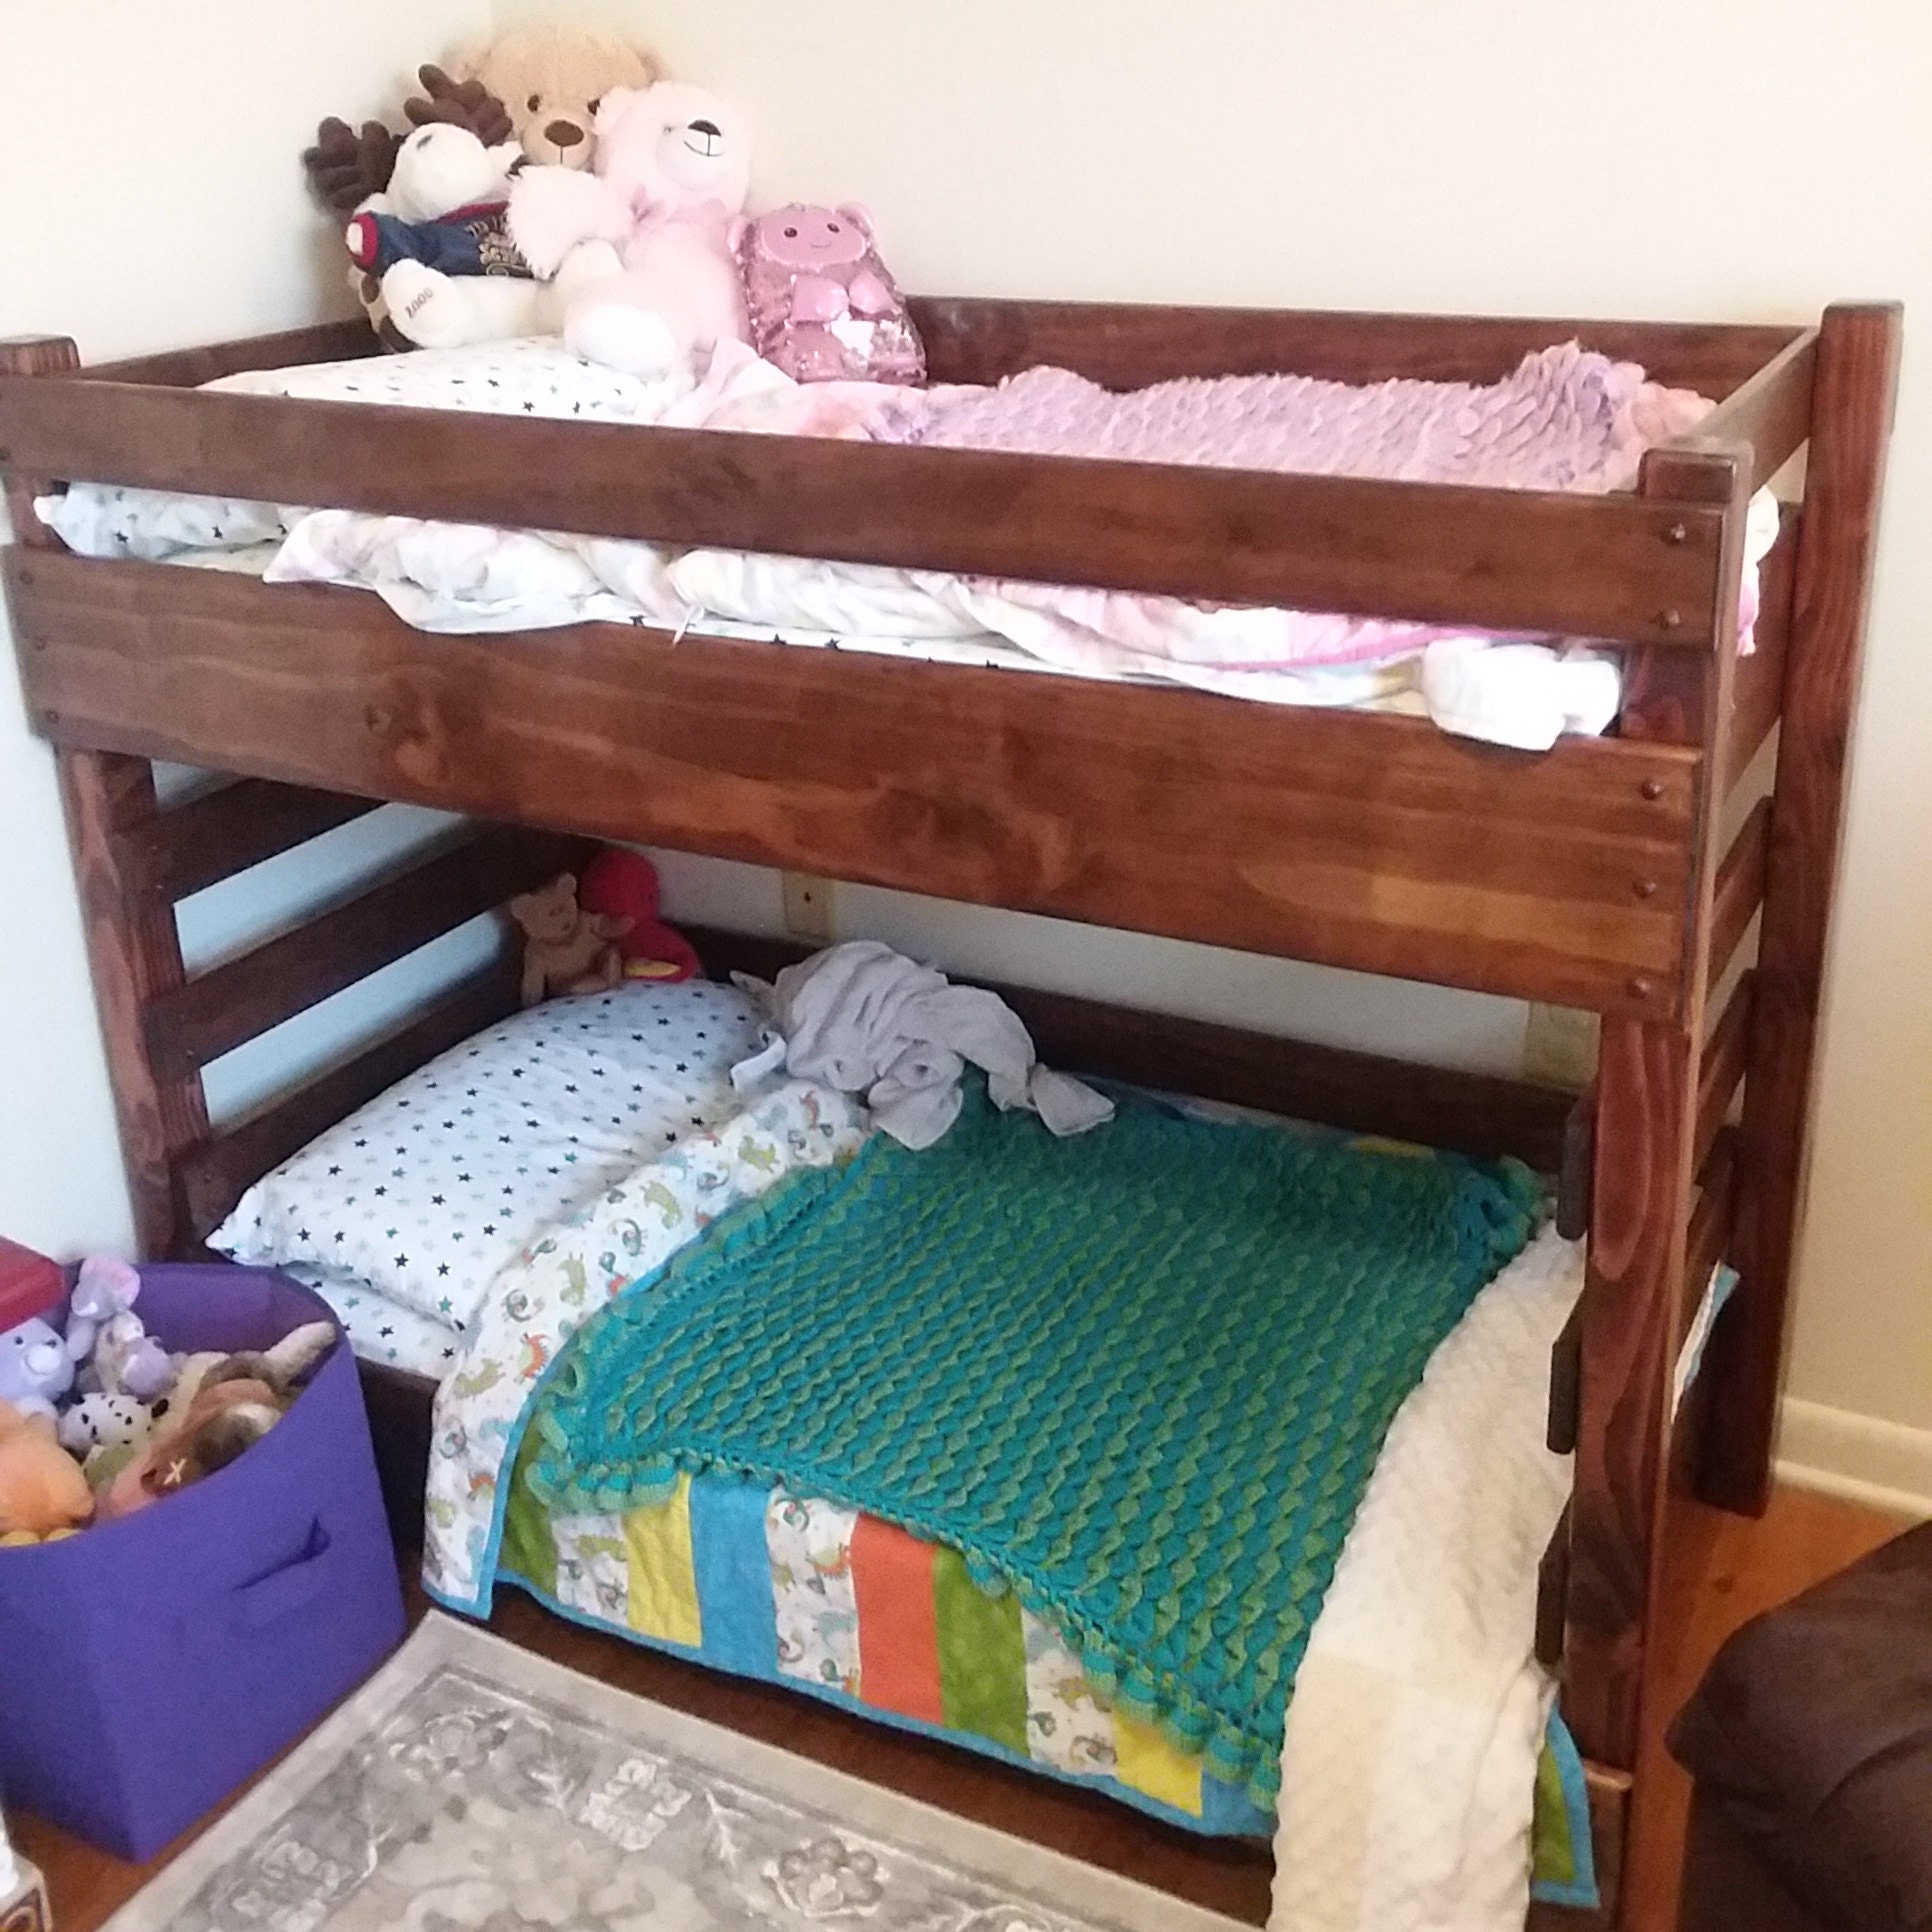 Toddler Bunk Bed Do It Yourself DIY Plans fits a Crib Size